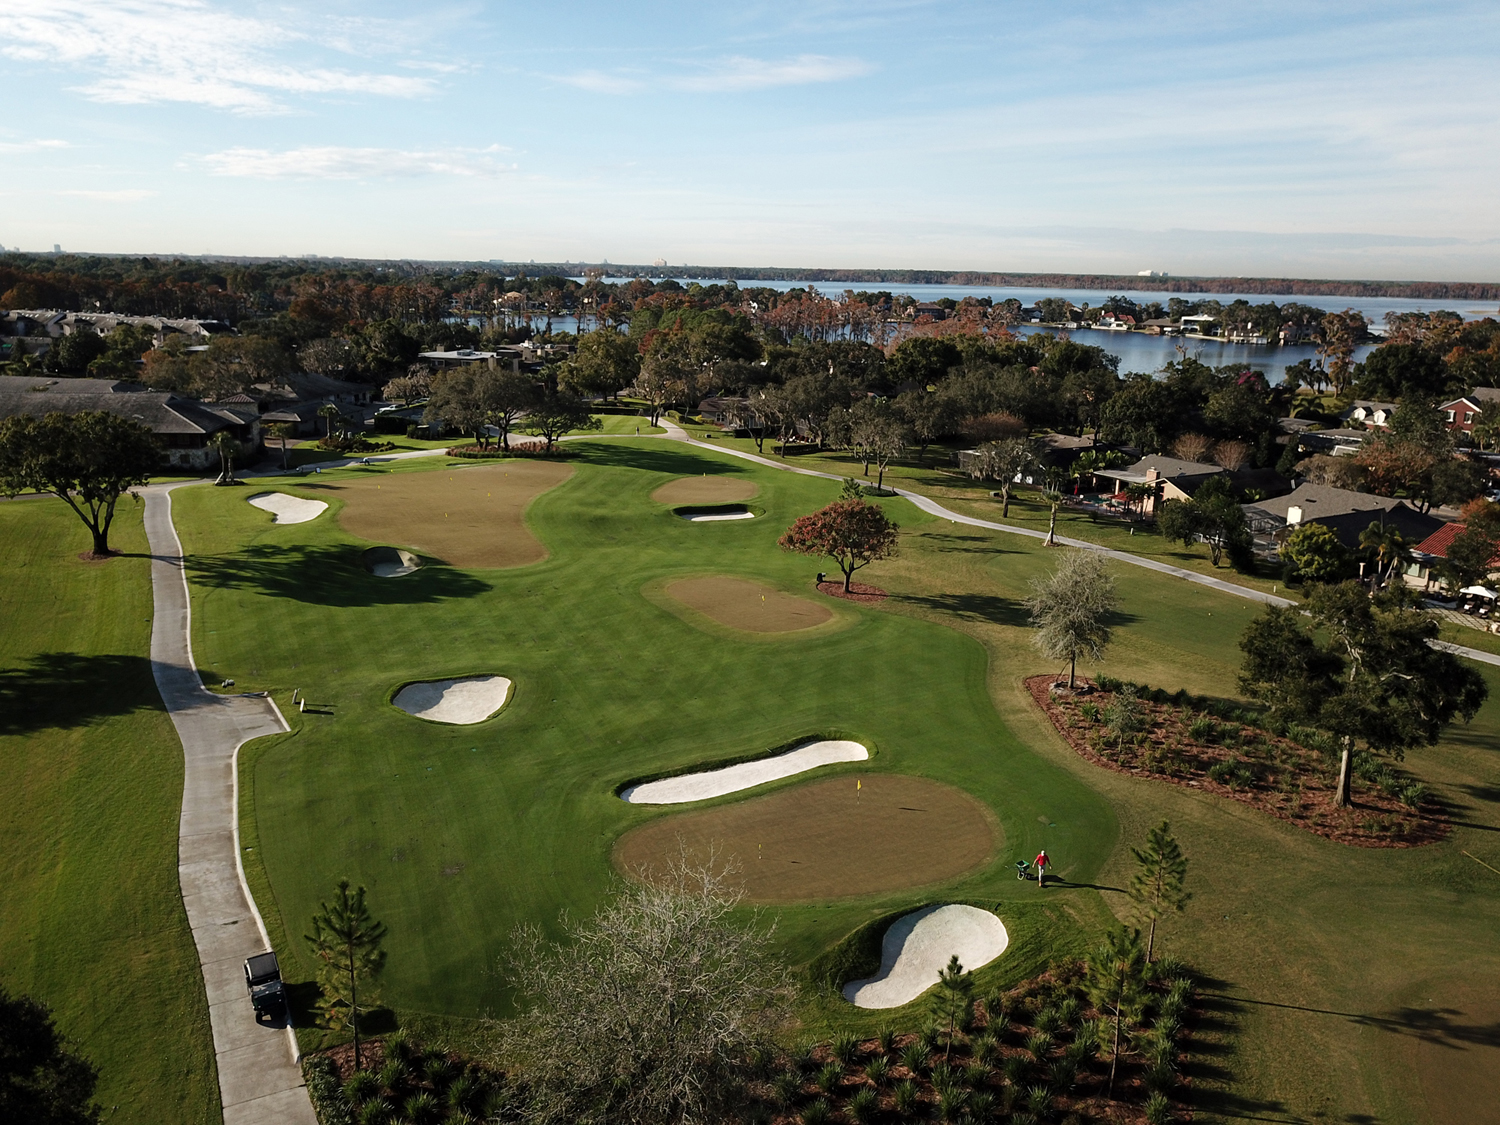 An Upgraded Short Game Area - Taking Bay Hill Club & Lodge into the Future  - Golf Range Association